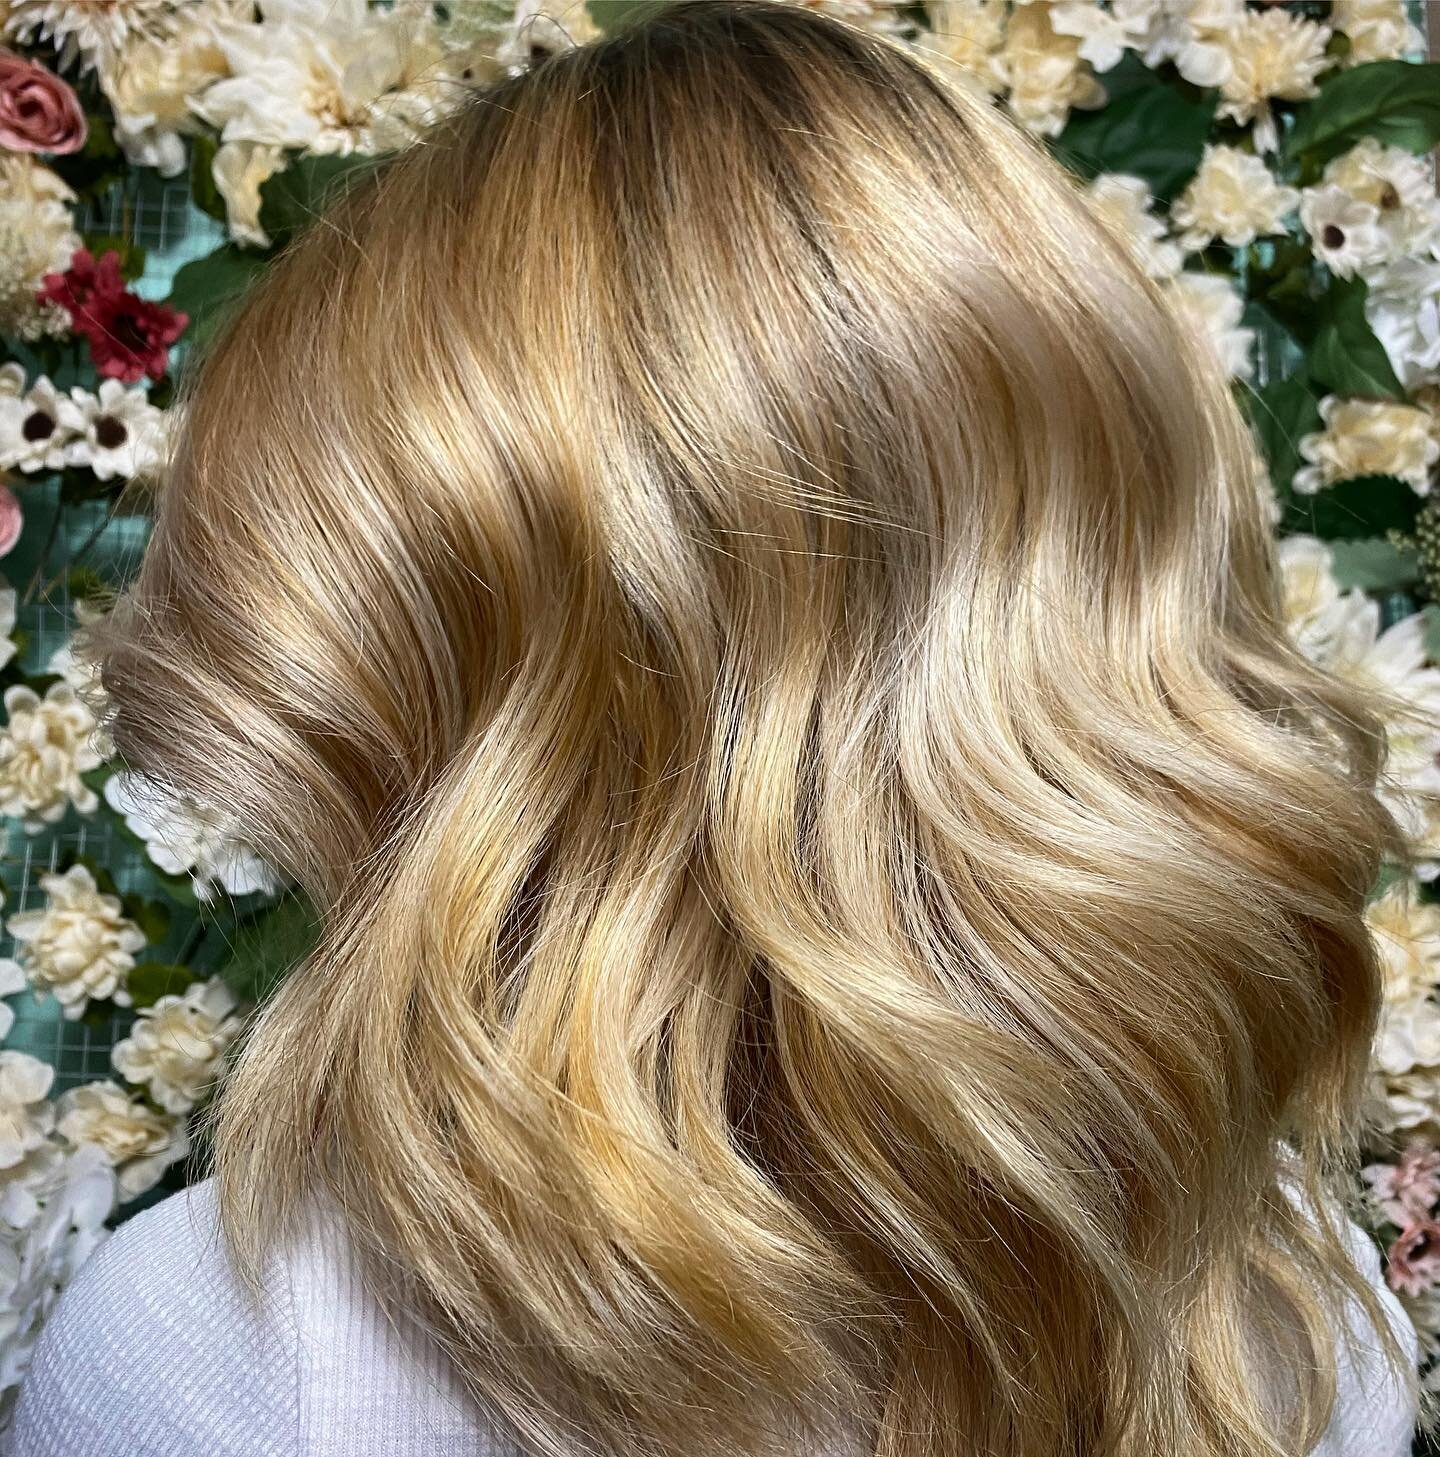 @haylienhair has availability this week to make your beach hair dreams come true! Let&rsquo;s add a touch of sunshine to your crown! 🌞
.
.
.

#thewaywardparlor #southsideatlhair #atlhaircolor #westendbestendatl #atlhairwitch #haylienhair #teamwaywar